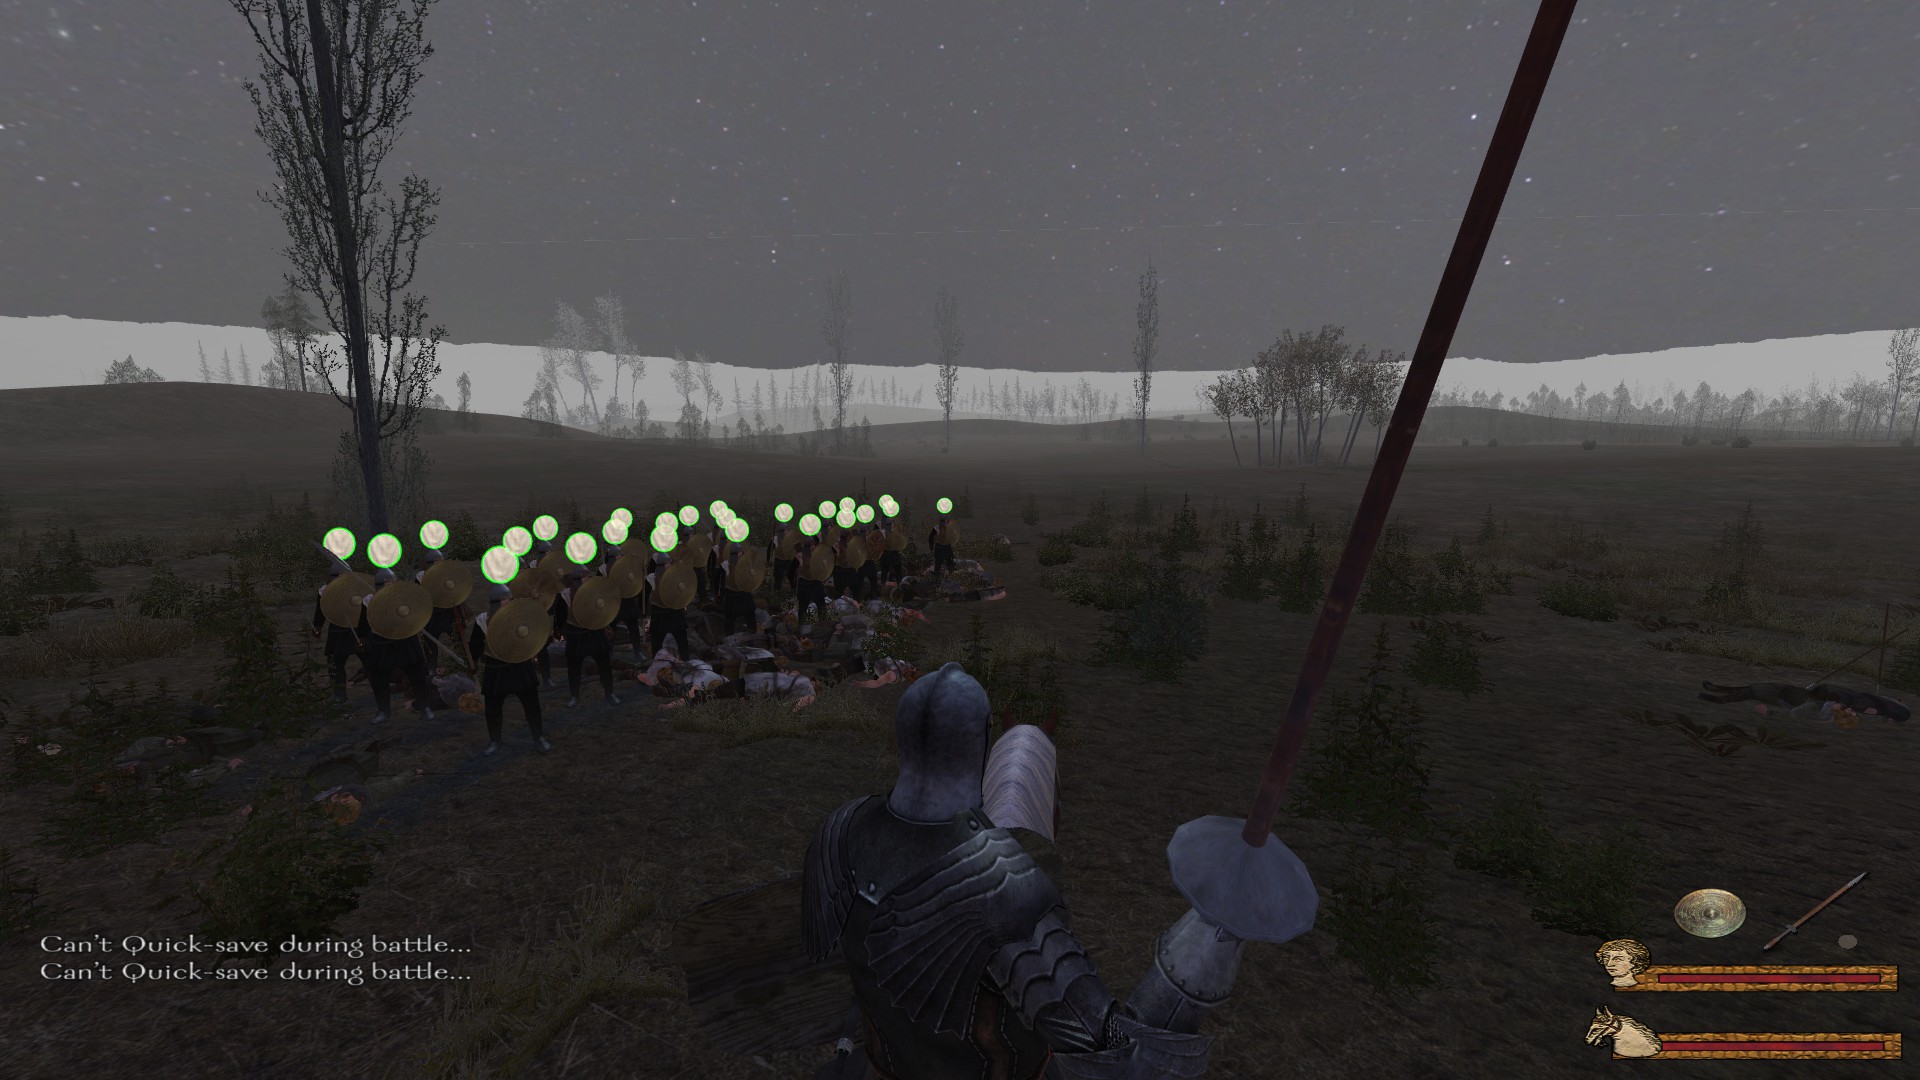 mount and blade a clash of kings quests